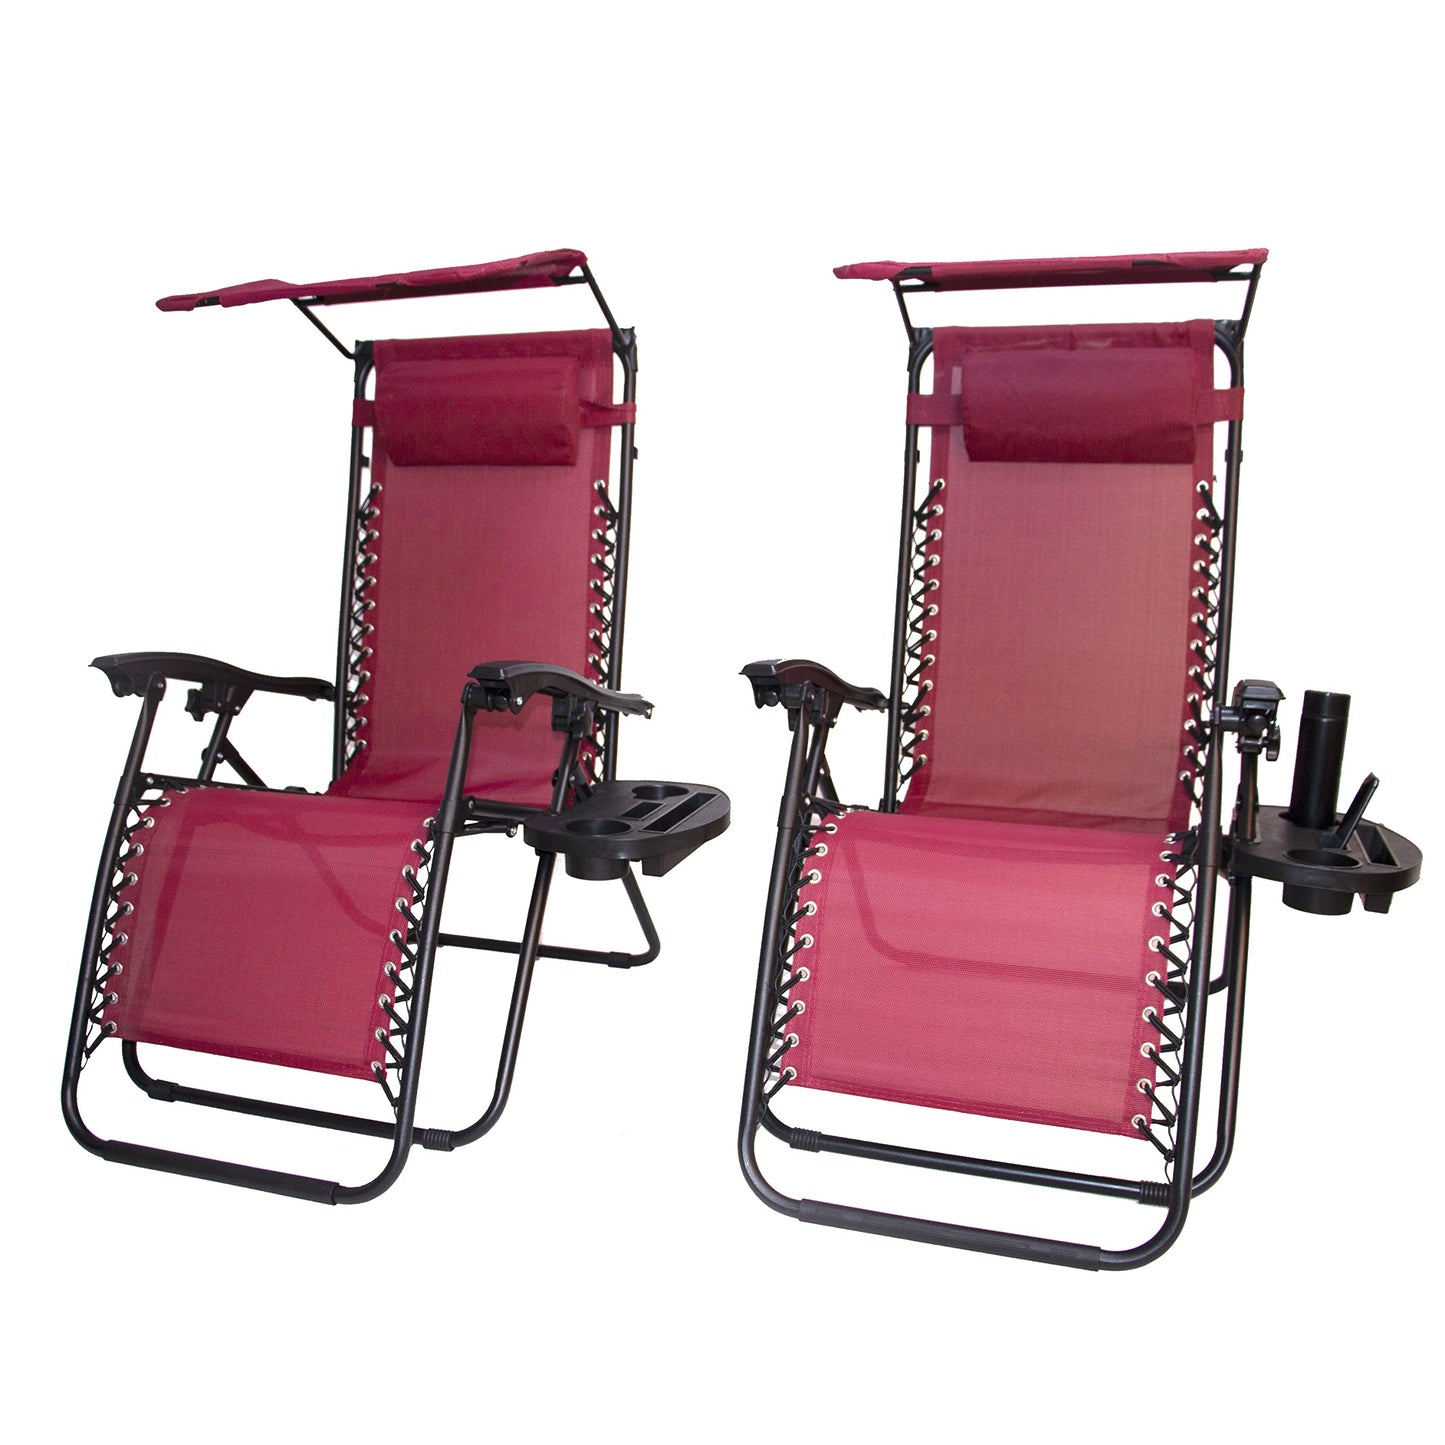 BTEXPERT CC5044BY Zero Gravity Chair Lounge Outdoor Pool Patio Beach Yard Garden Sunshade Utility Tray Cup Holder BurgundyTwo Case Pack (Set of 2 pcs), Two Piece, Burgundy with Canopy